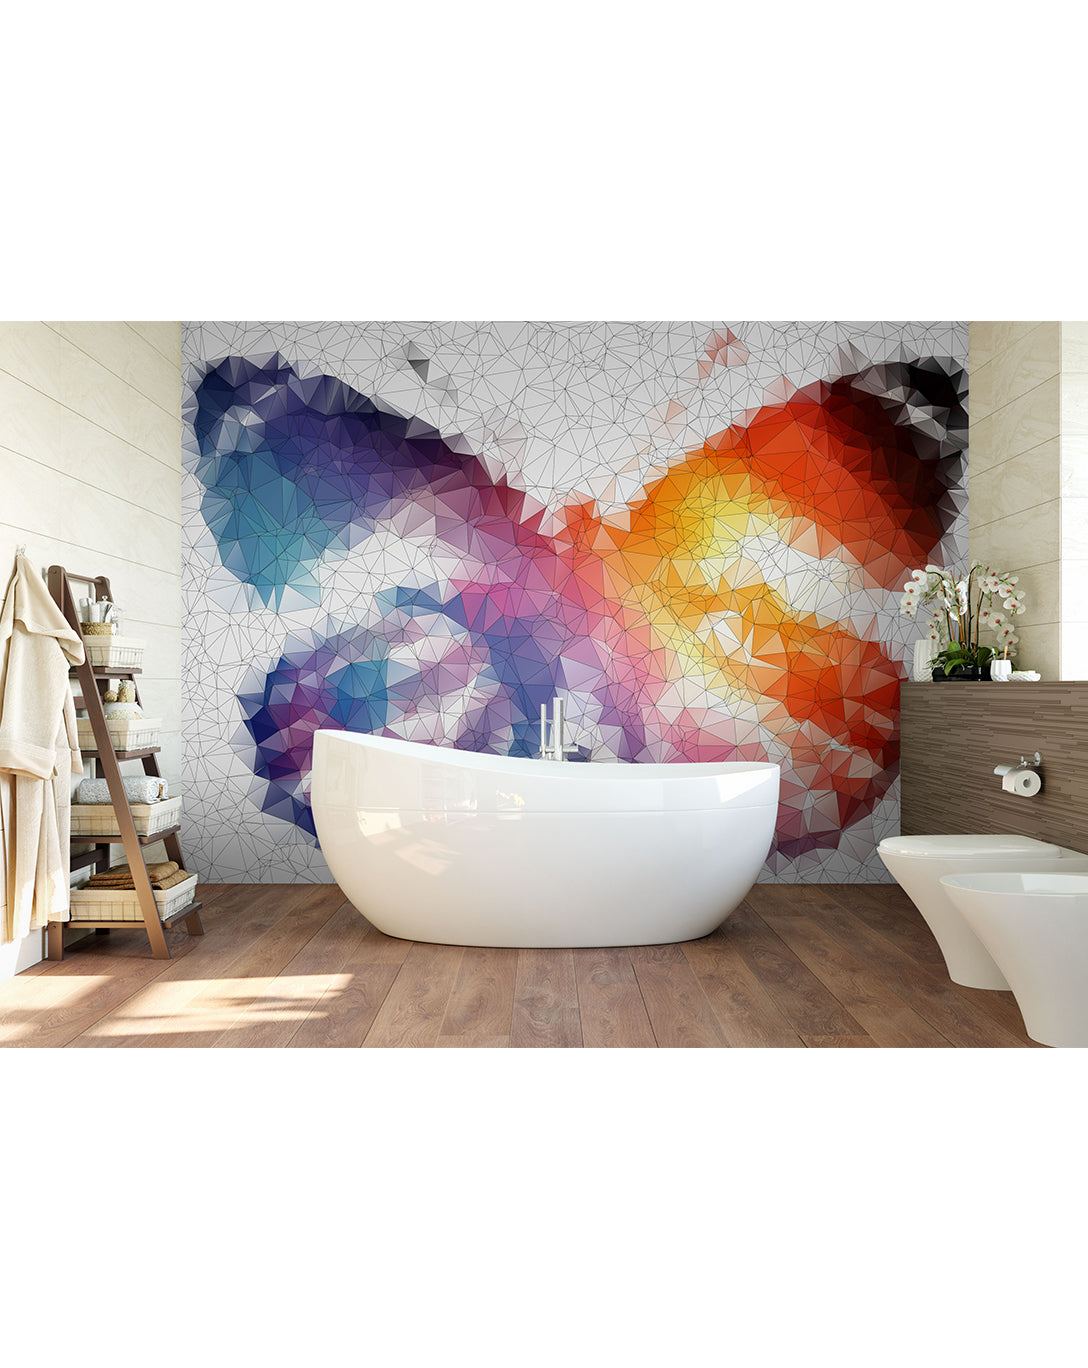 Abstract Butterfly Self Adhesive Wall Mural, Colorful Geometric Vector Art Wall Decal, Peel and Stick Mosaic Wallpaper Sticker CCM010